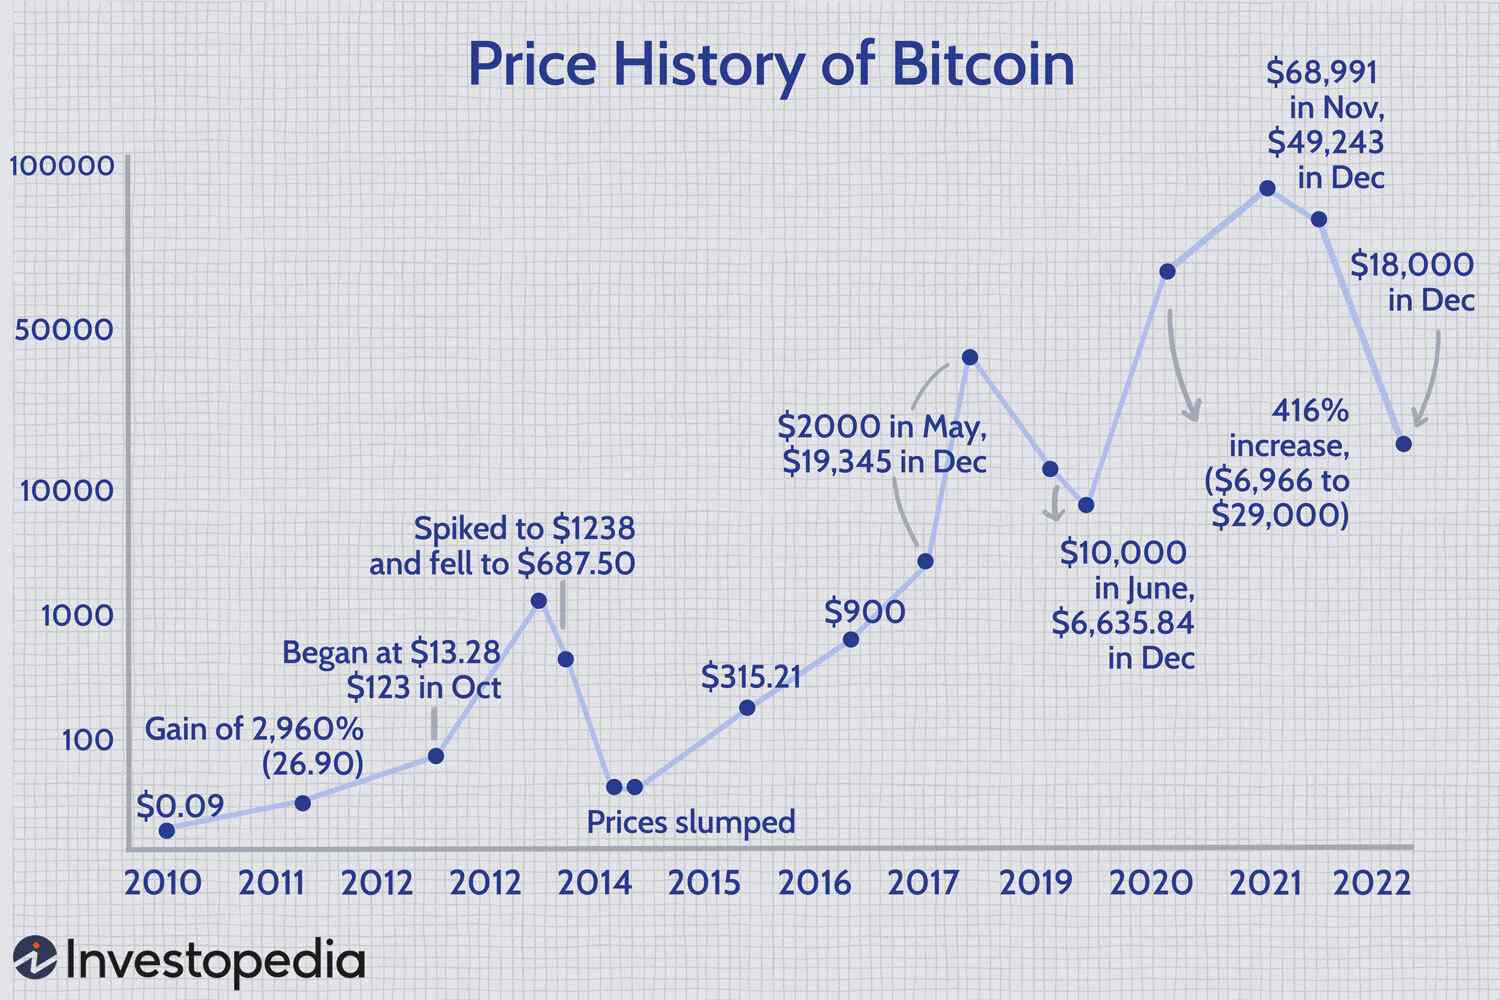 What Will Happen to Bitcoin in the Next Decade?